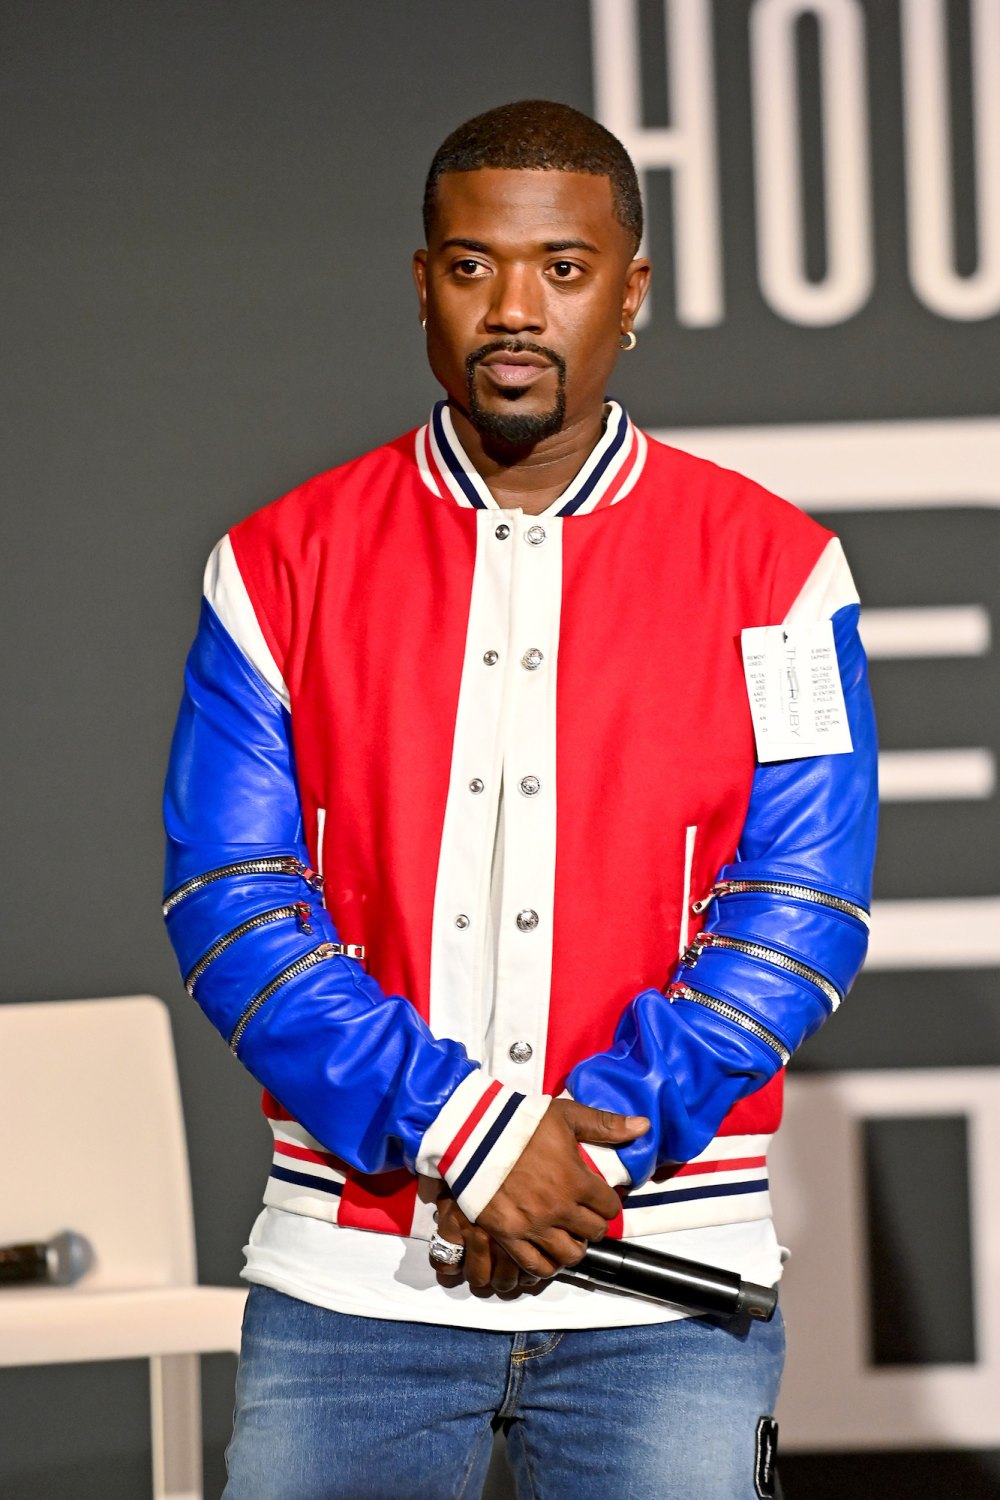 The Rise and Fall of Ray J over the years